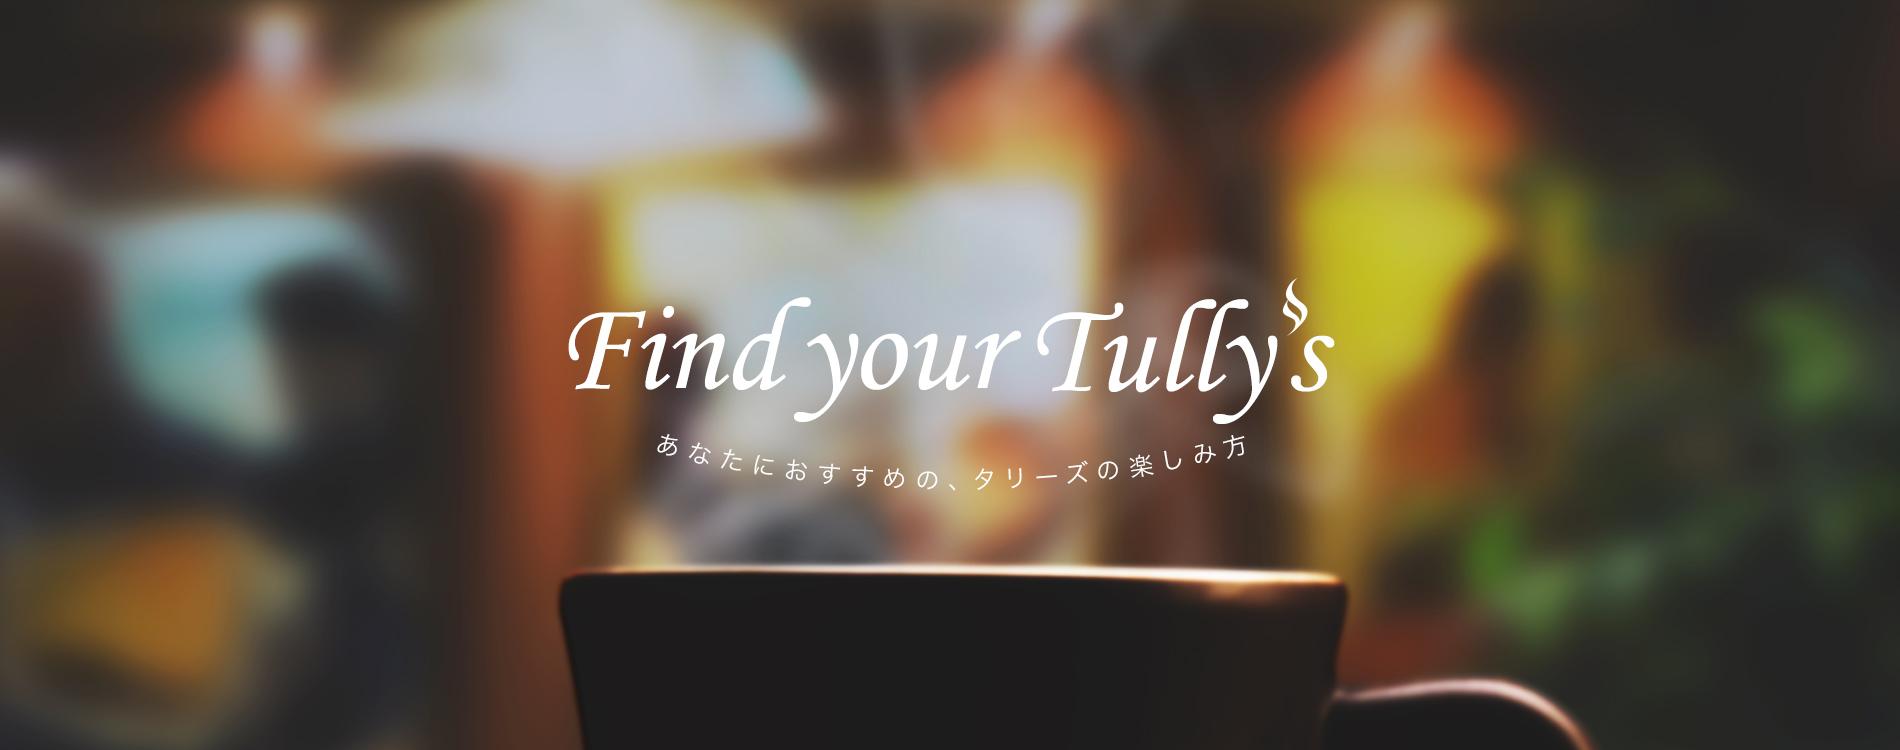 find your tully's